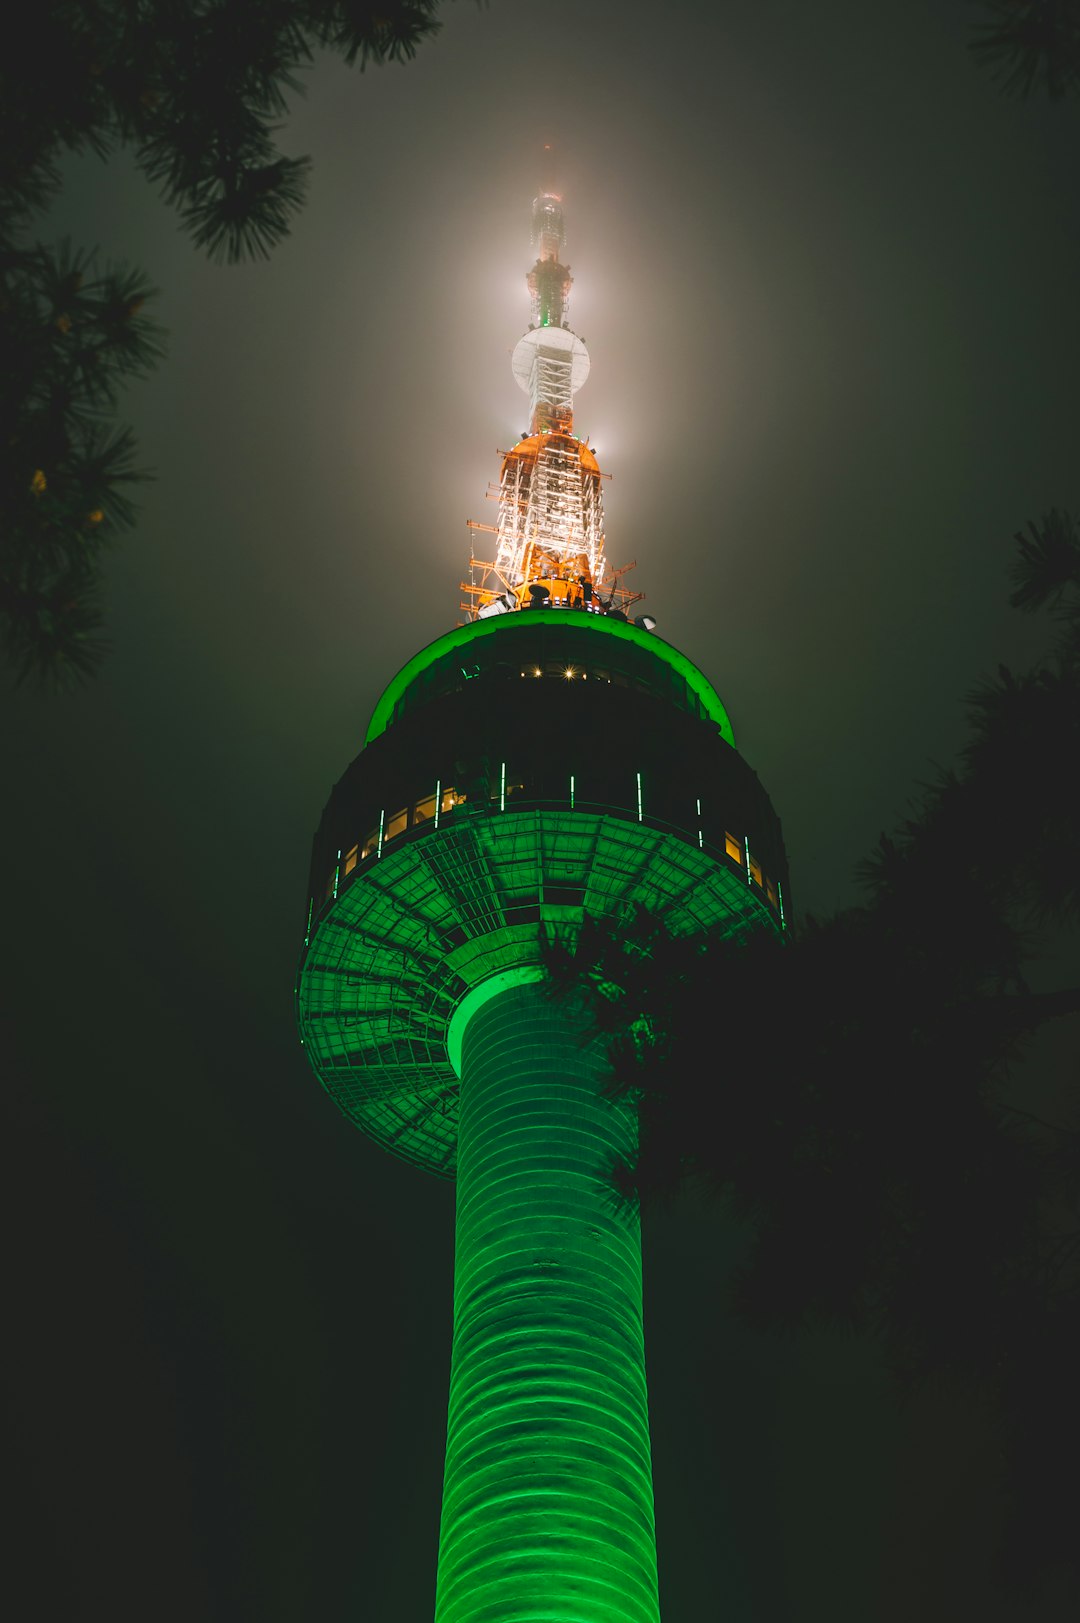 N Seoul Tower - From Ground, South Korea